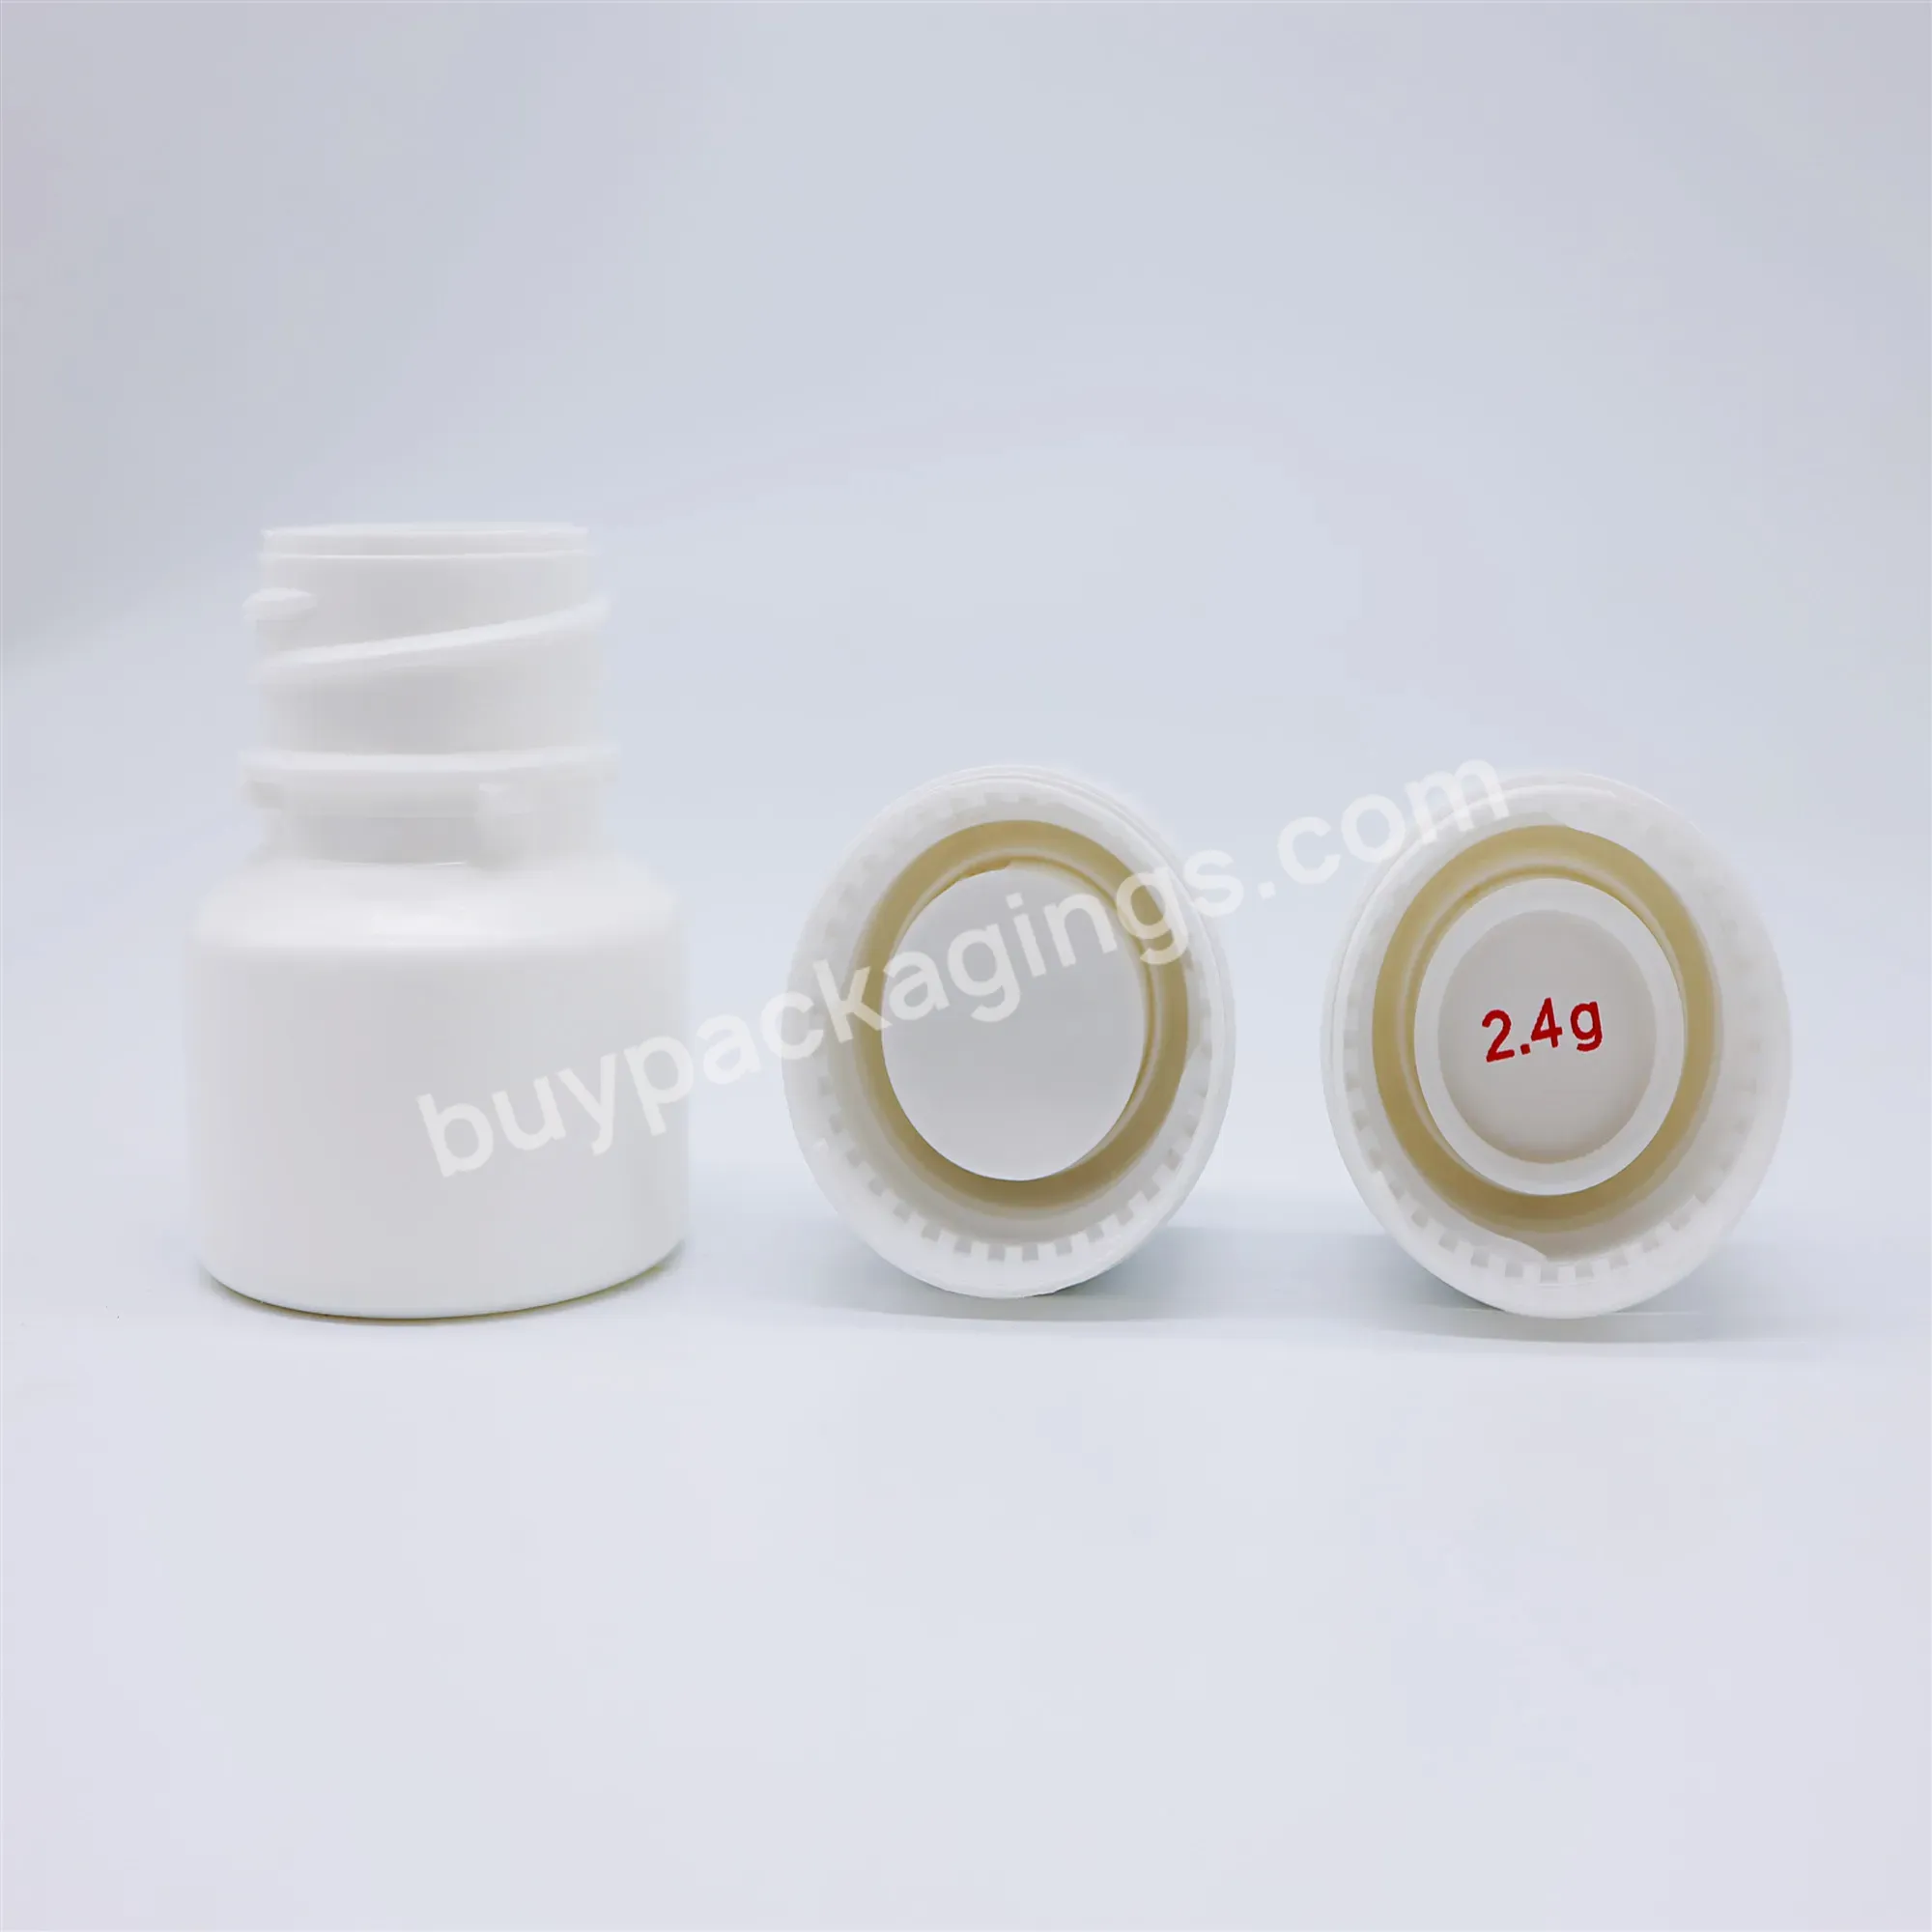 20ml 30ml 35ml Medicine Pharma Bottle With Crc Pill Containers